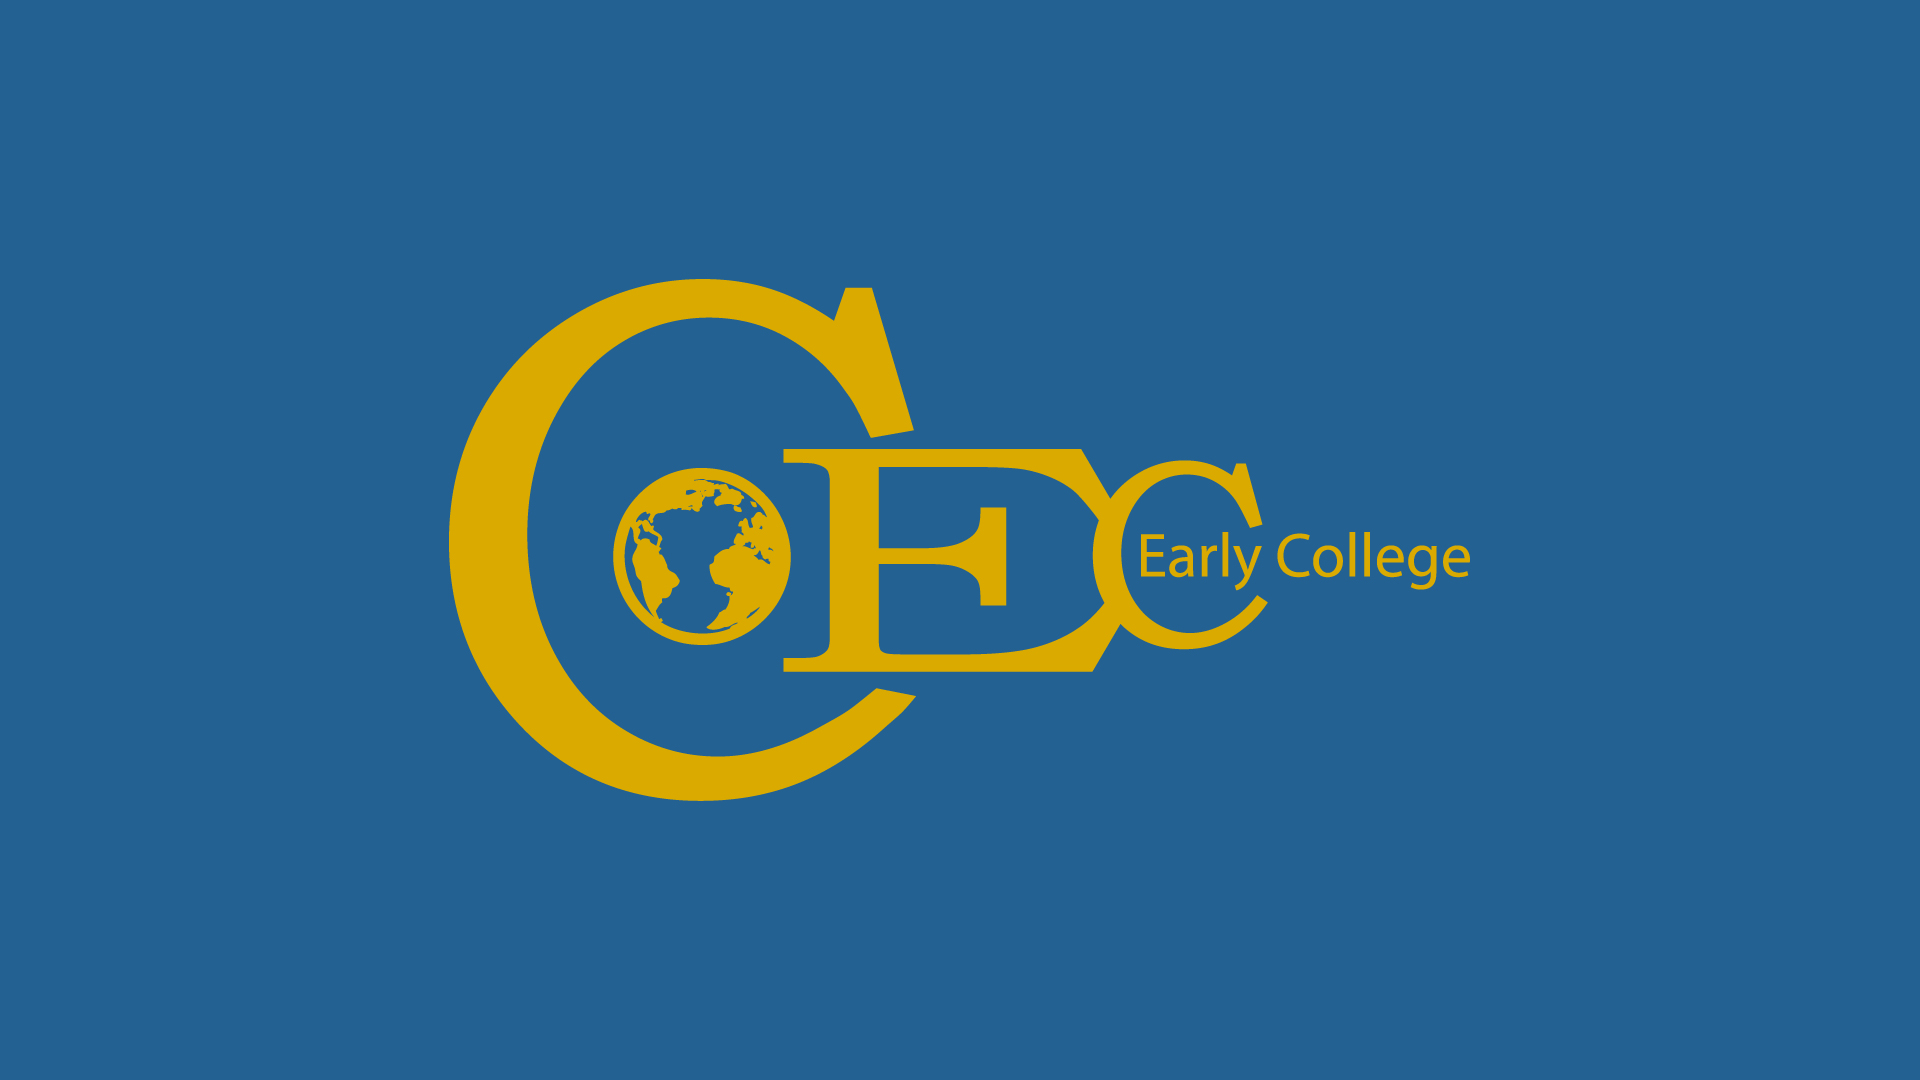 CEC Early College logo